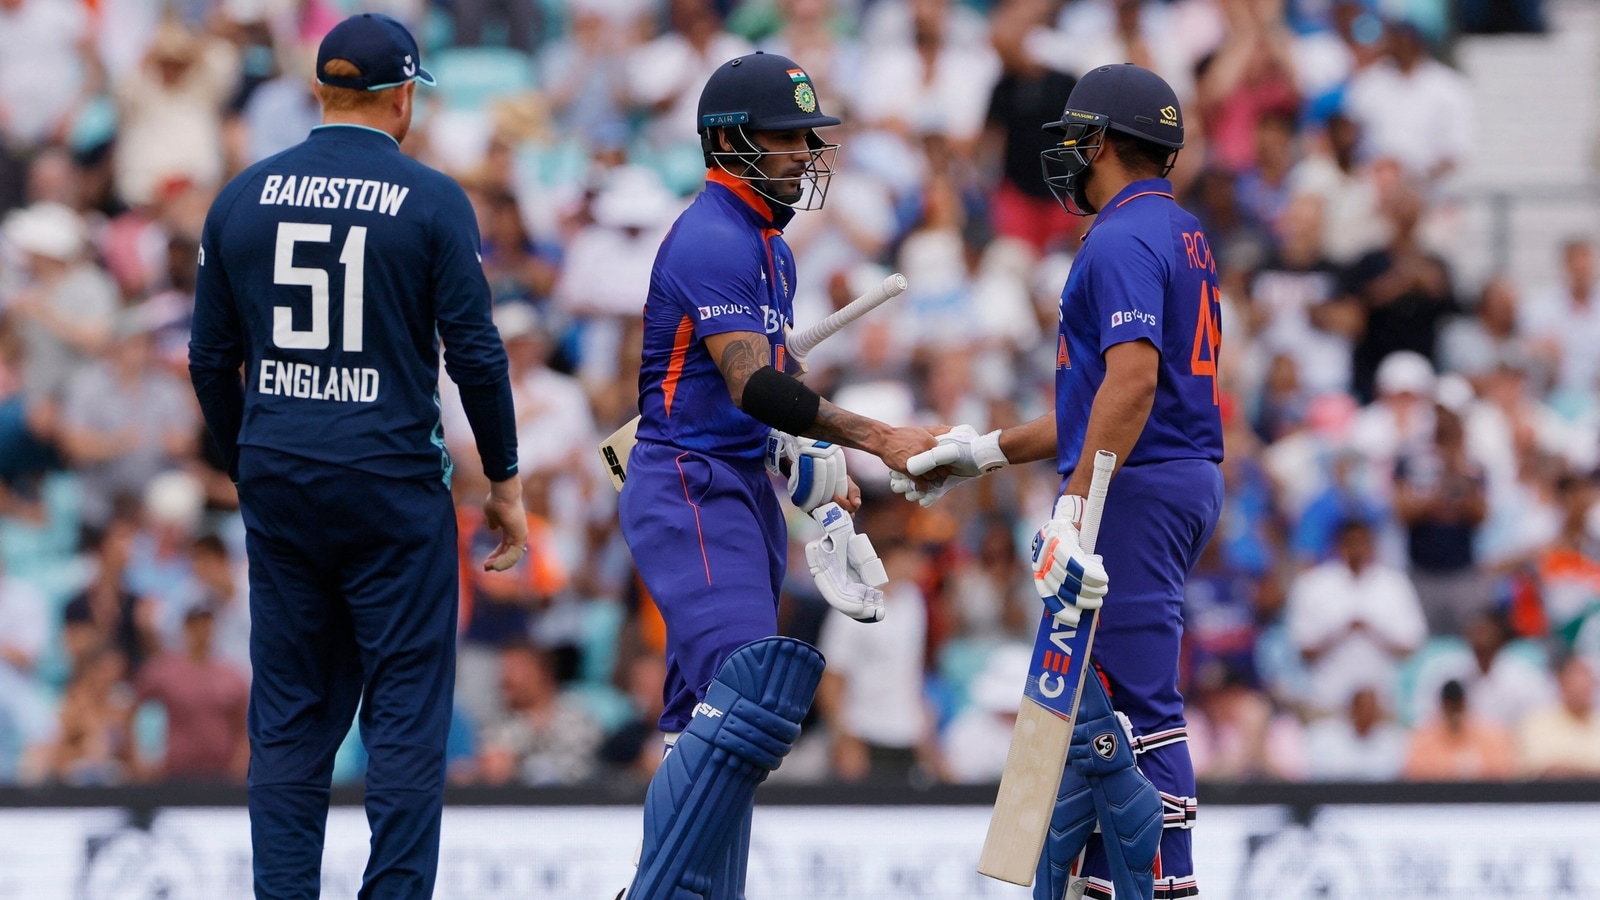 India vs England Live Streaming When and where to watch IND vs ENG 2nd ODI Cricket